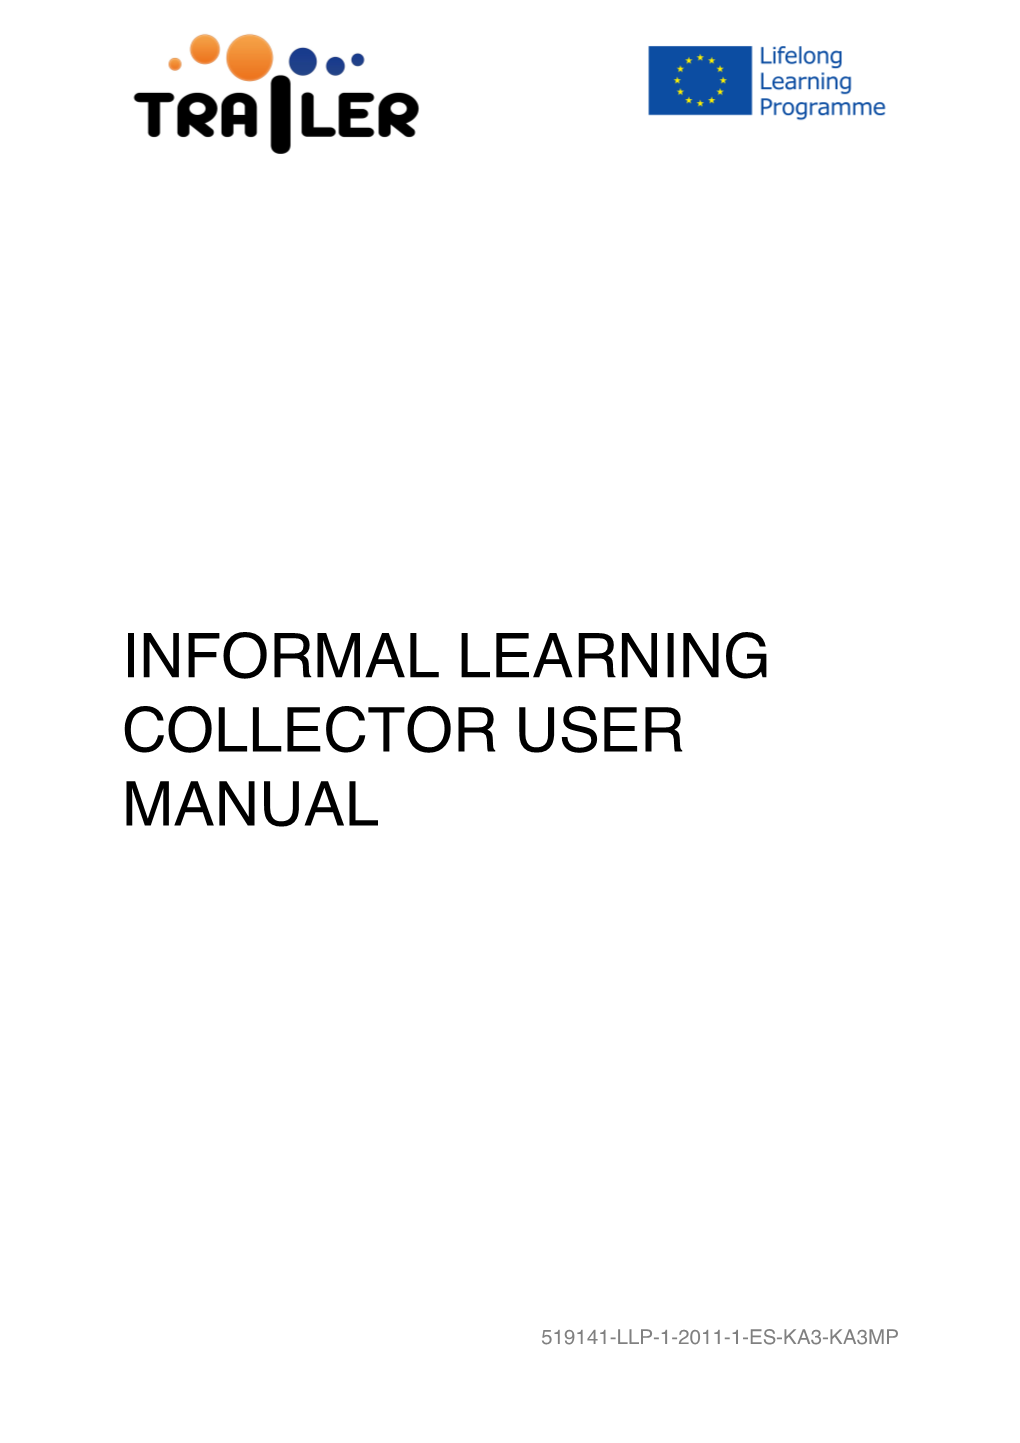 Informal Learning Collector User Manual